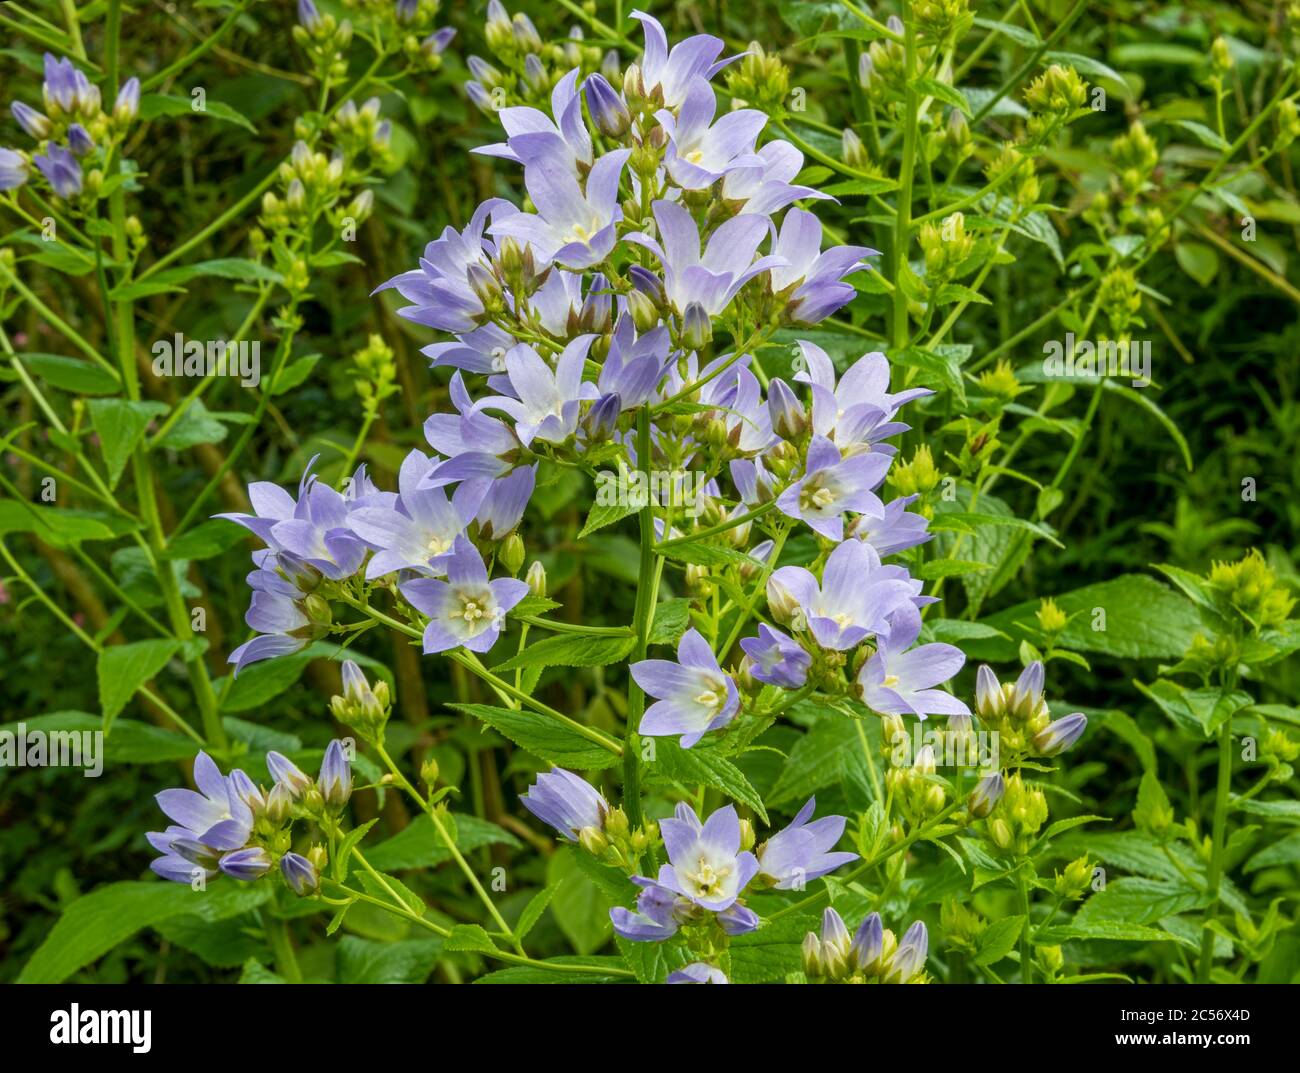 Closeup of pake blue violet Campanula lactiflora (Milky Bellflower) in border with blurred green foliage in background. Stock Photo